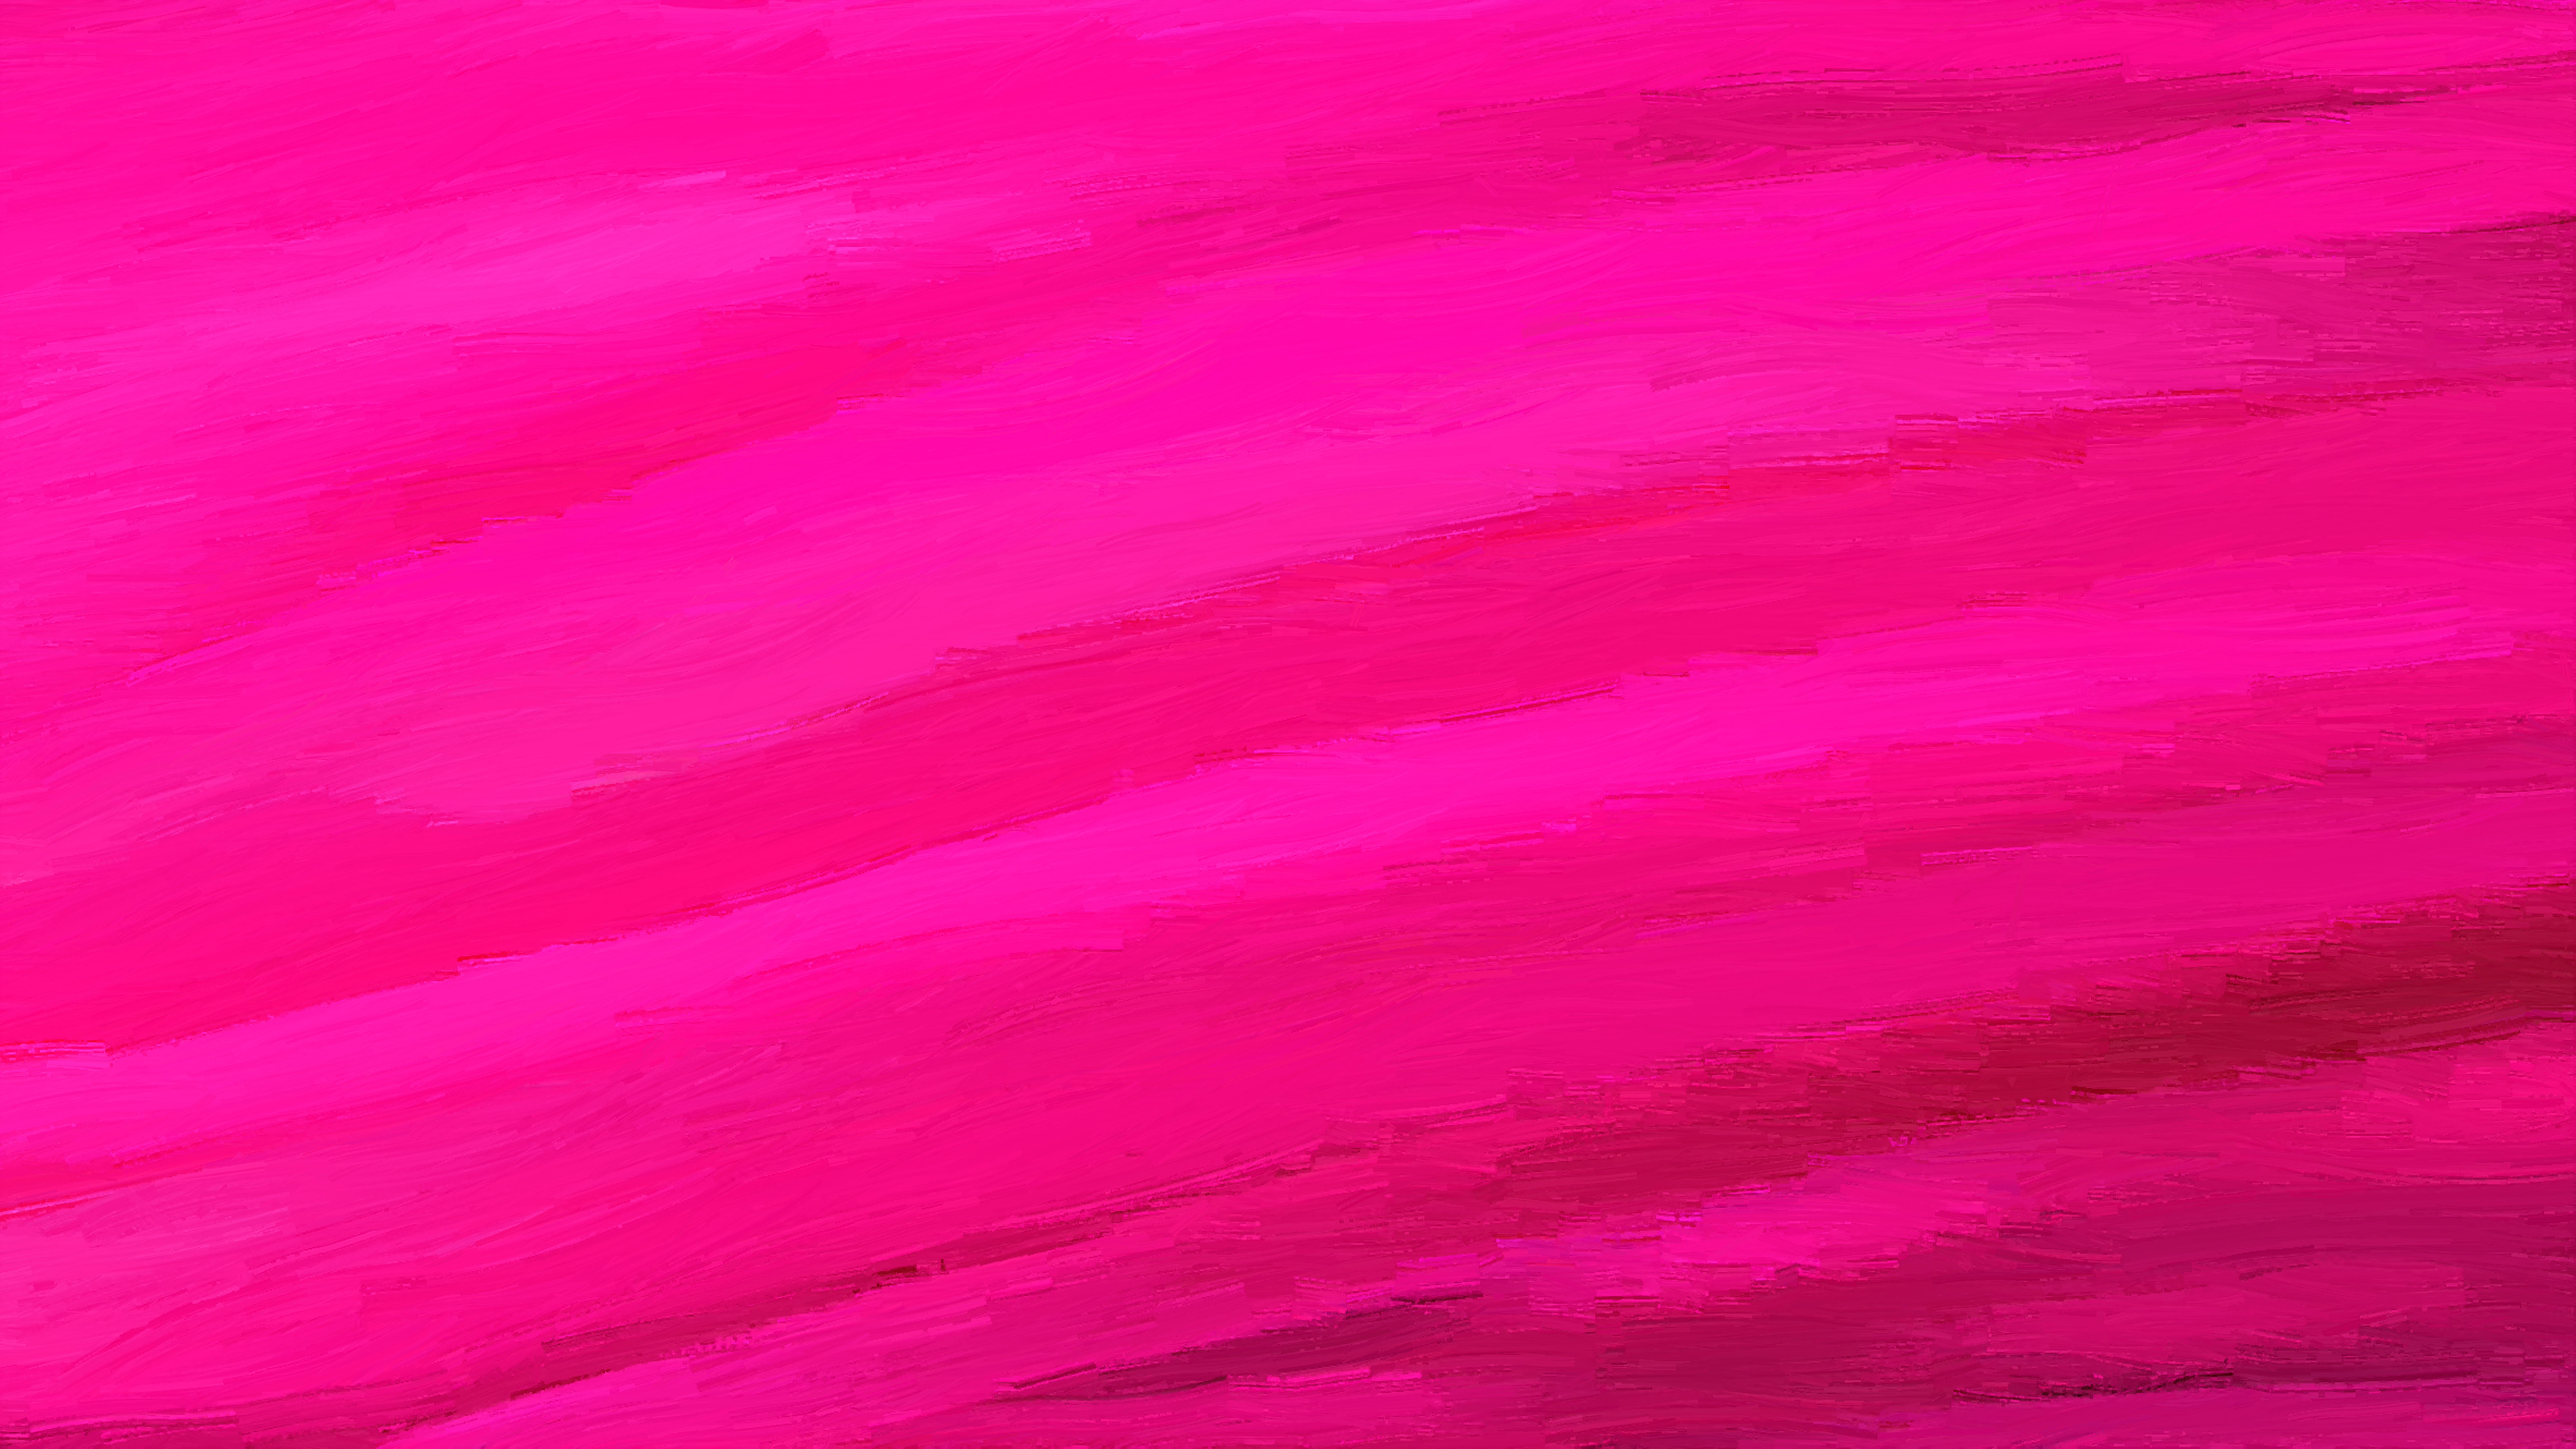 Pink Monochromatic Texture. Download High Resolution Free ImageFreevectors